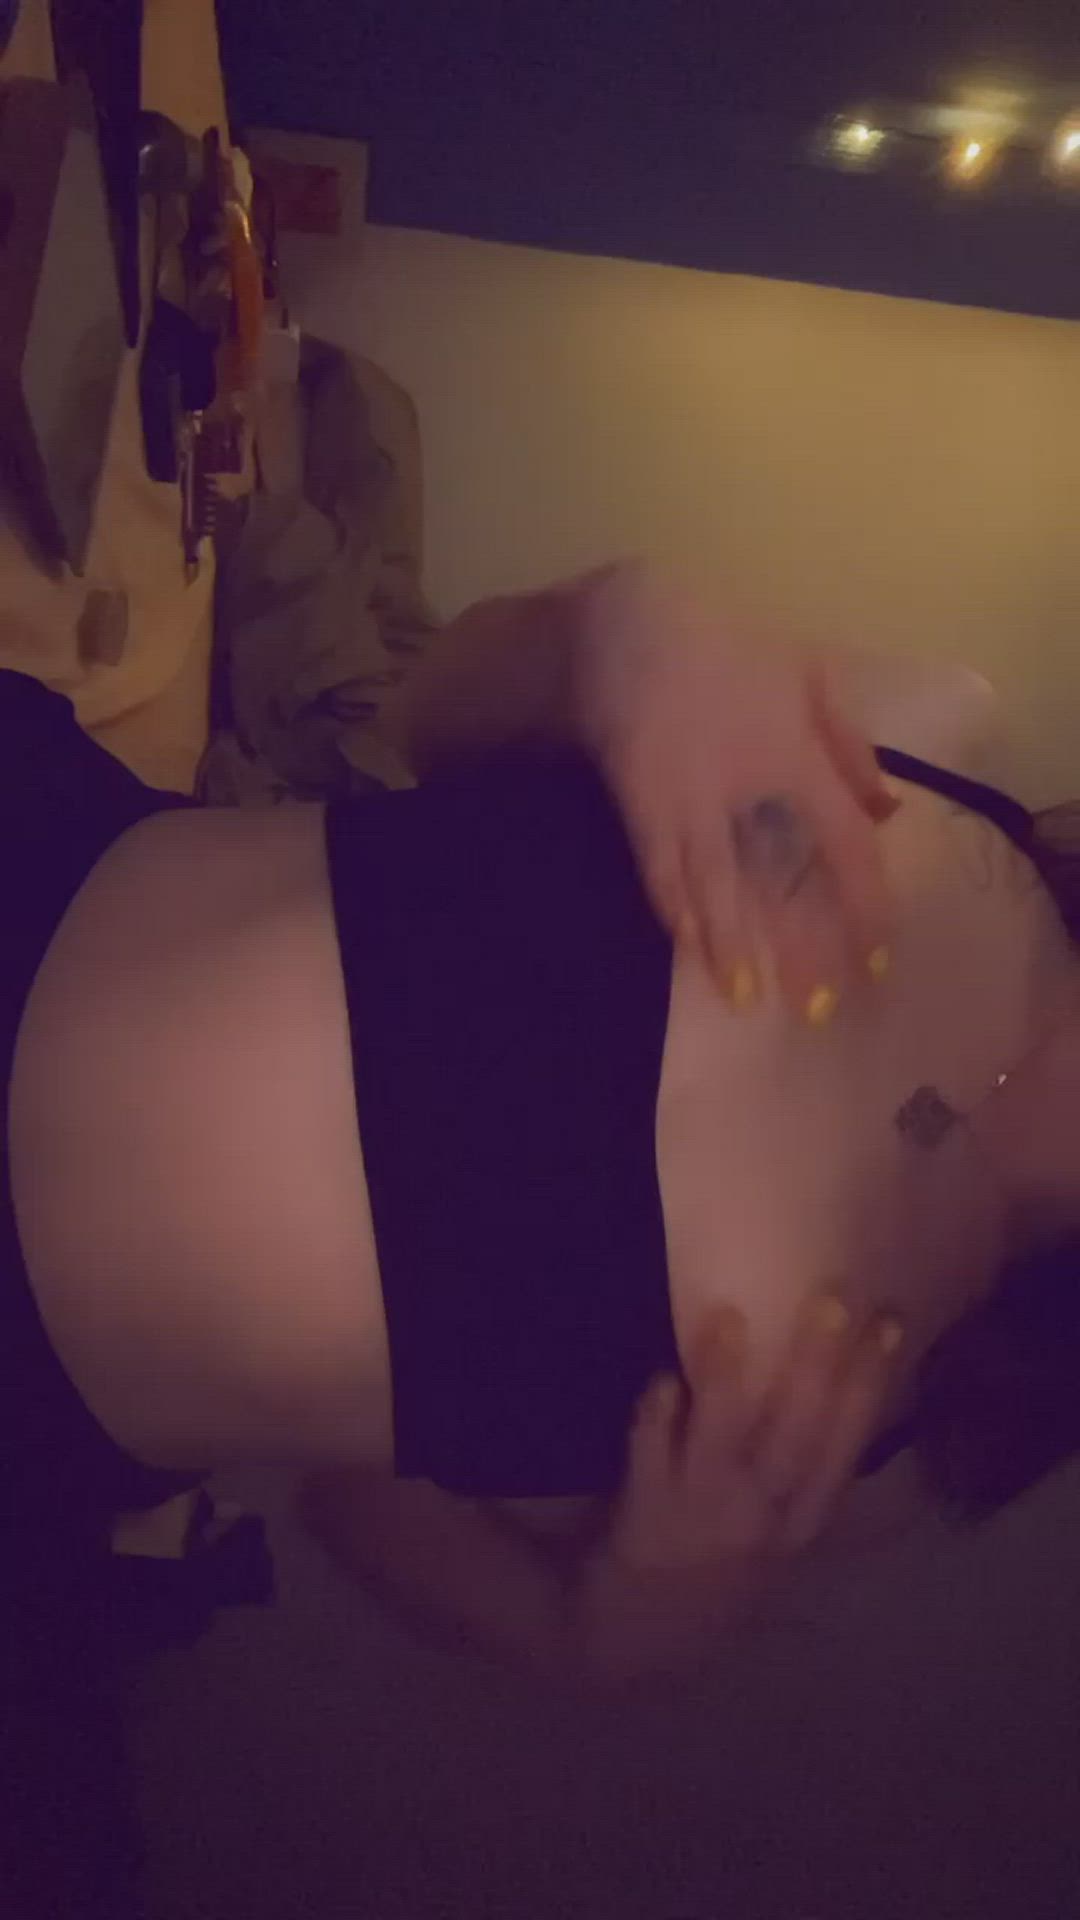 Boobs porn video with onlyfans model bumblebea98 <strong>@el_bea123</strong>